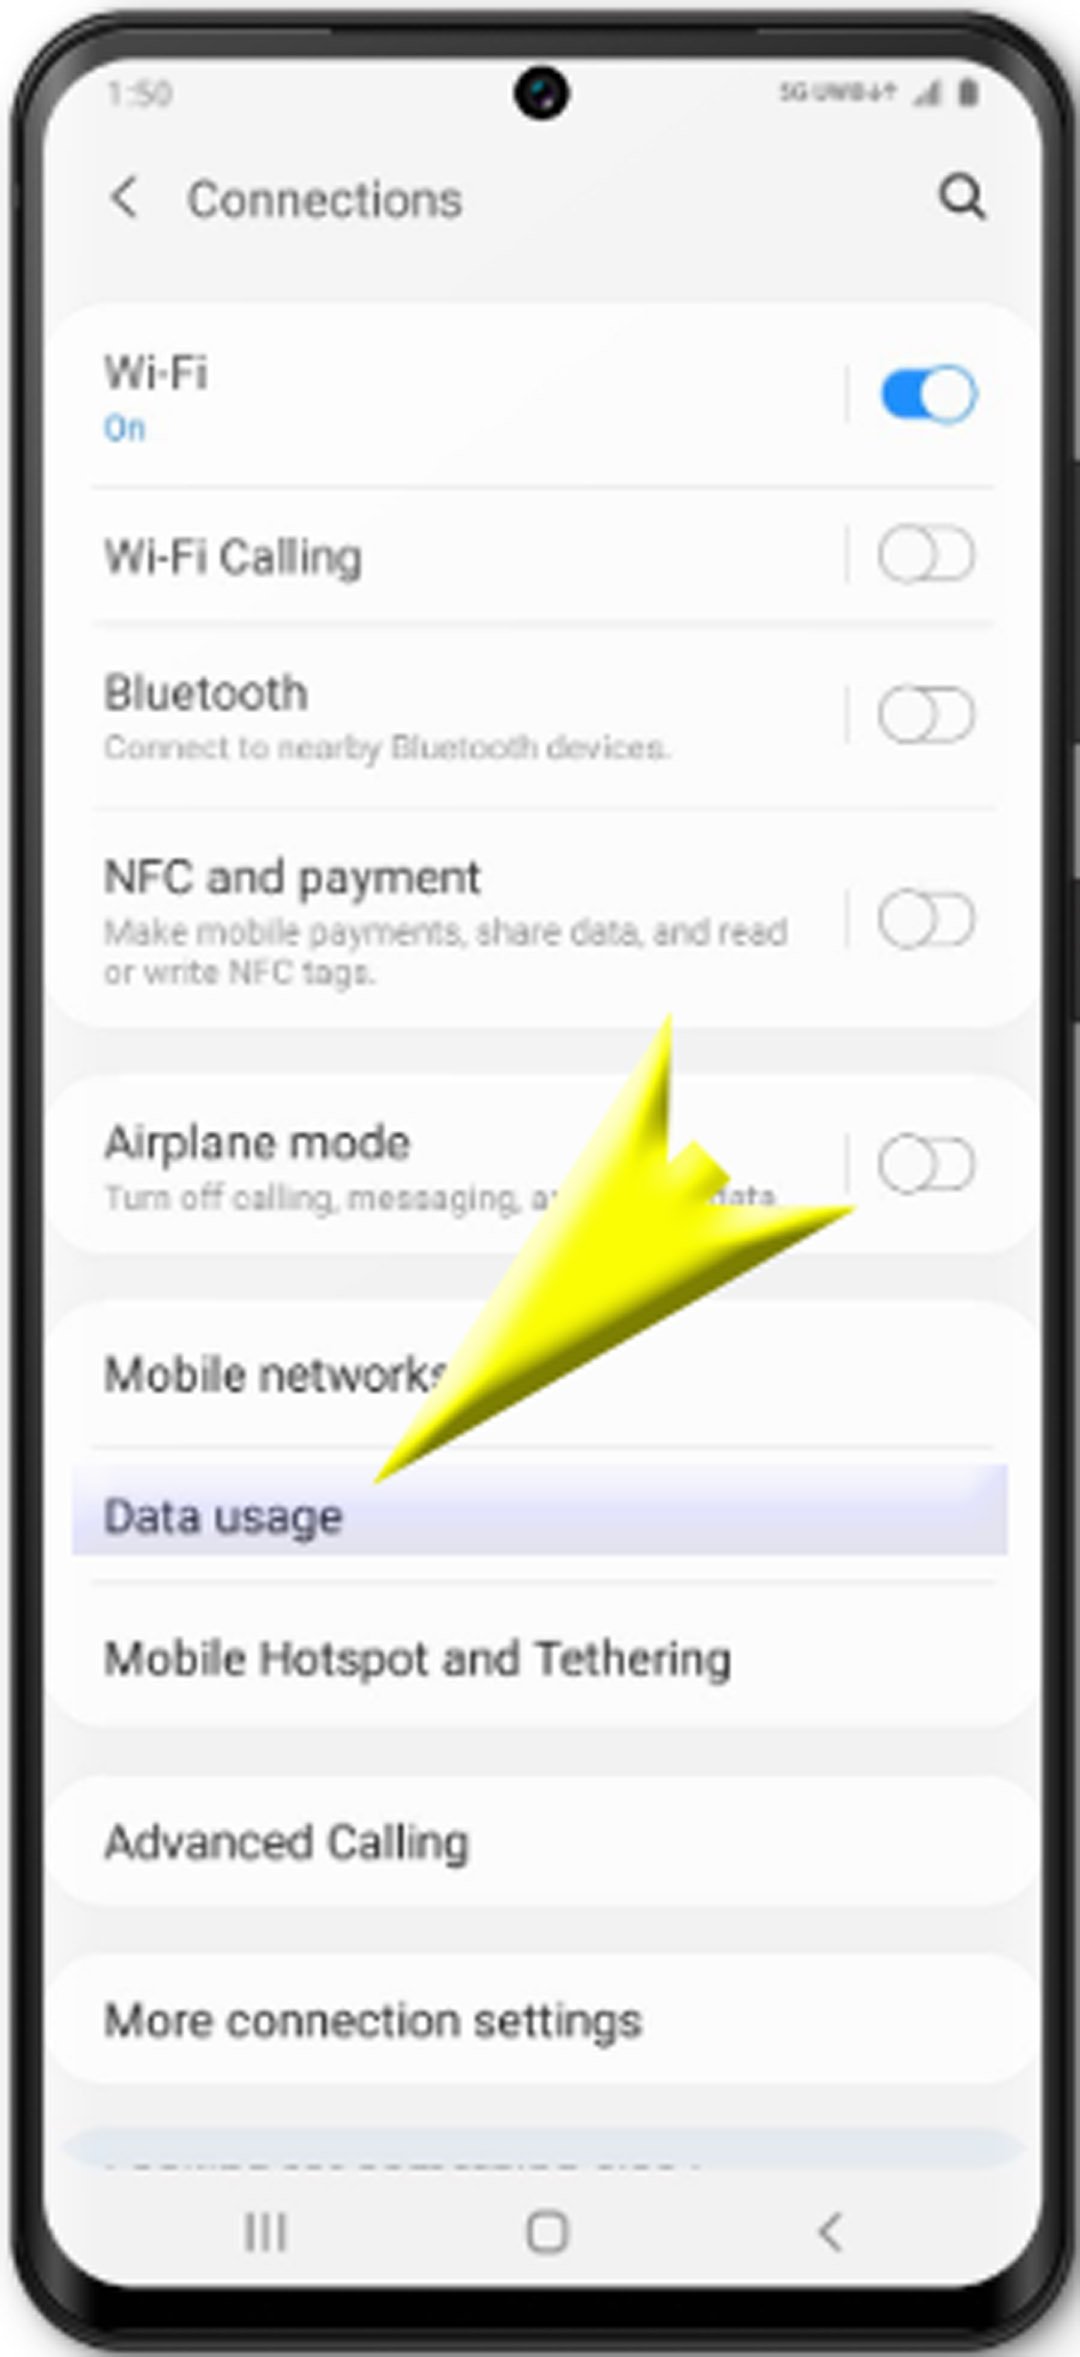 connect galaxy s20 to internet using mobile data - data usage settings